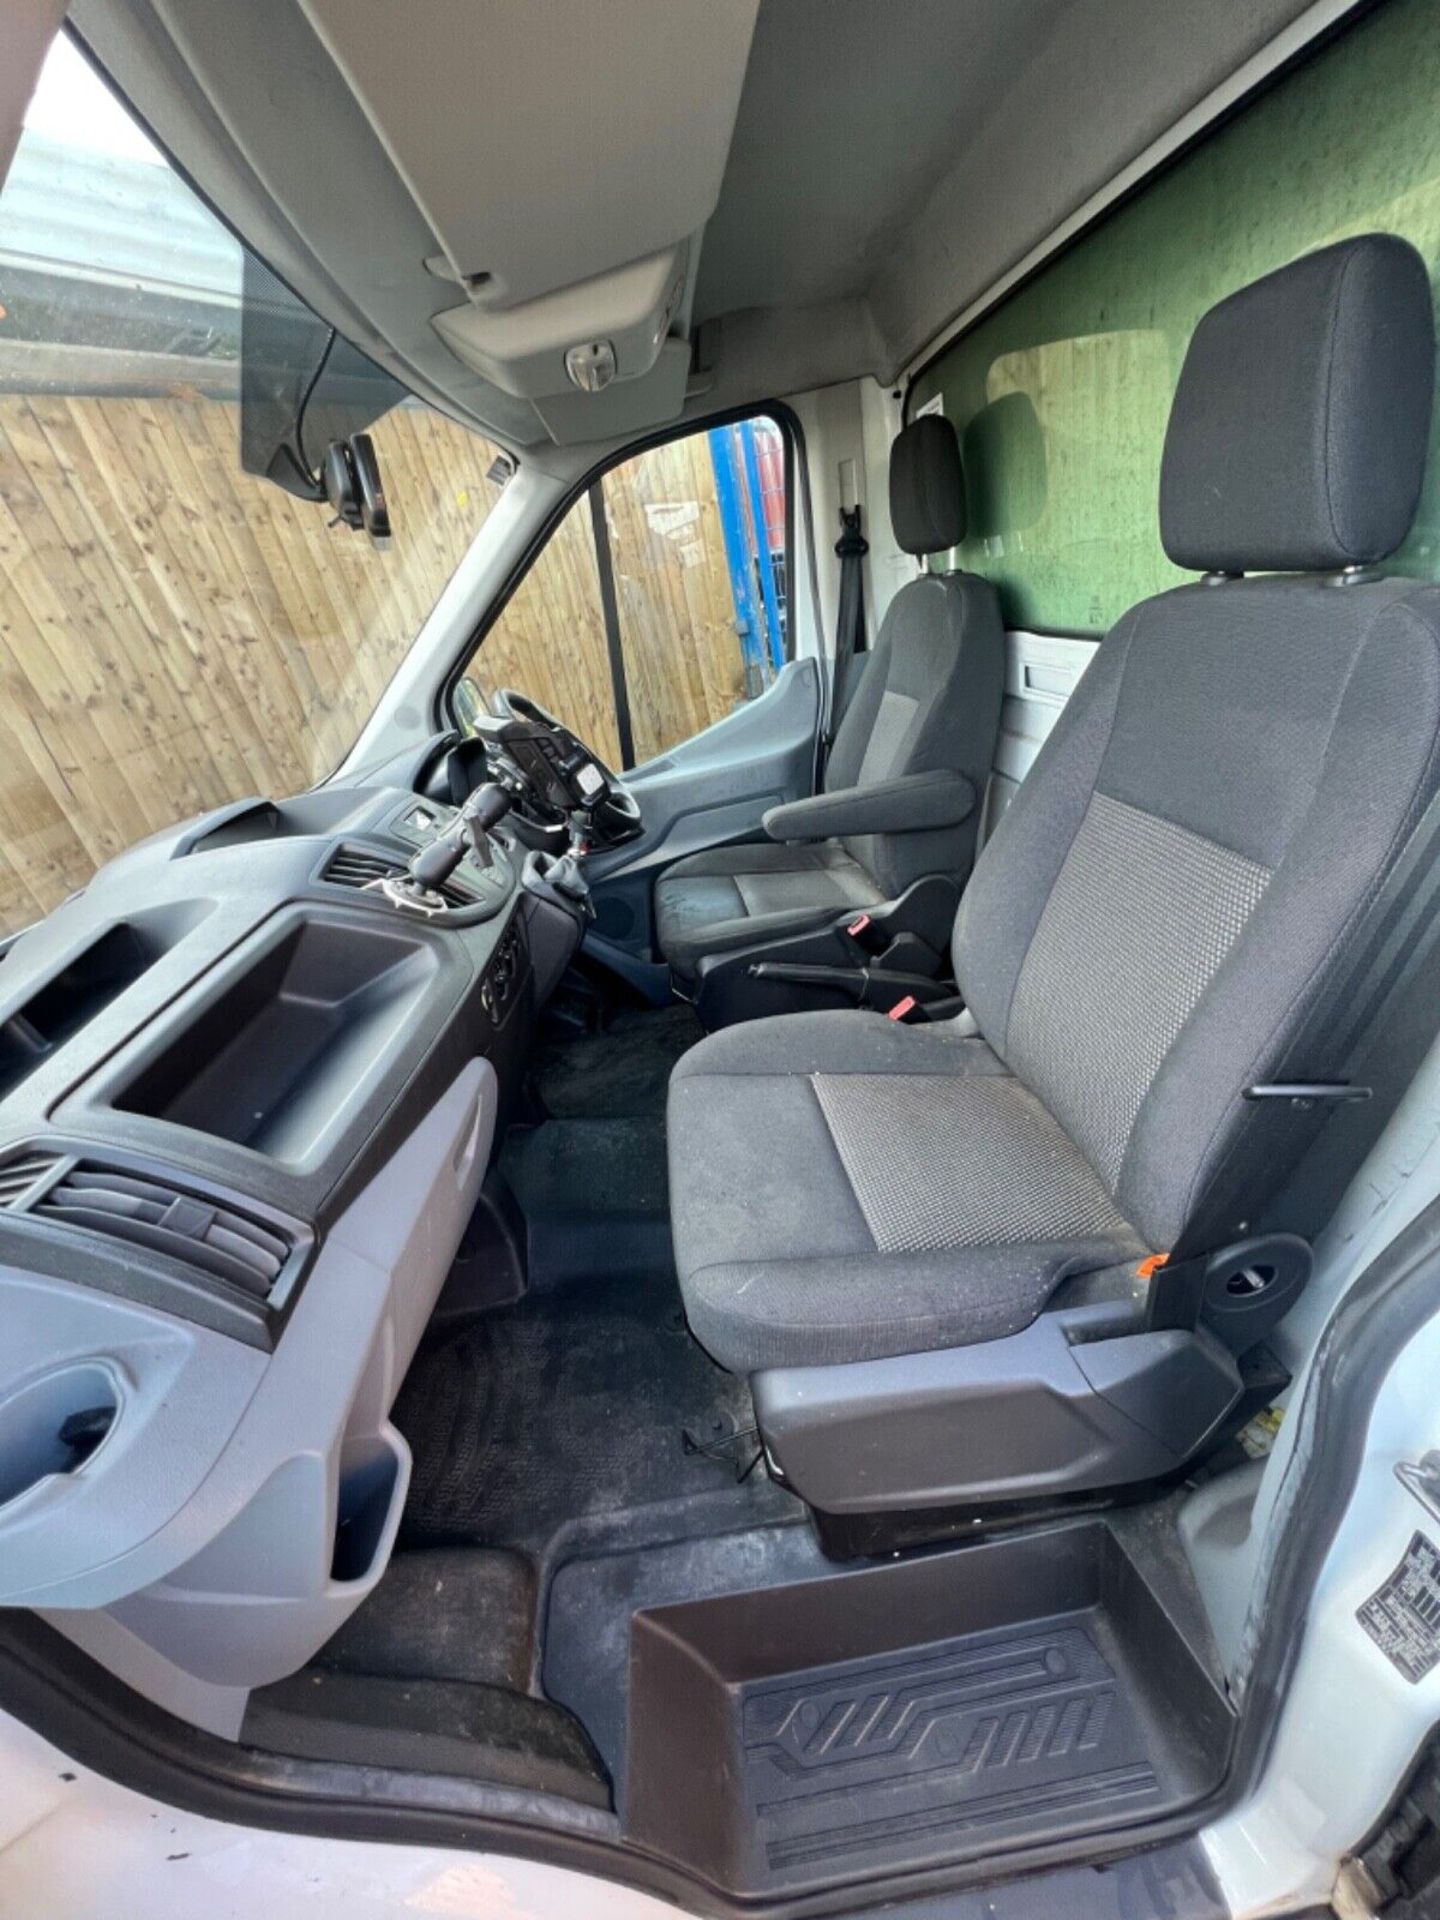 FORD TRANSIT BOX VAN 2017 LUTON EURO6 LWB 6 SPEED MANUAL 1COMPANY OWNER FROM NEW - Image 9 of 15